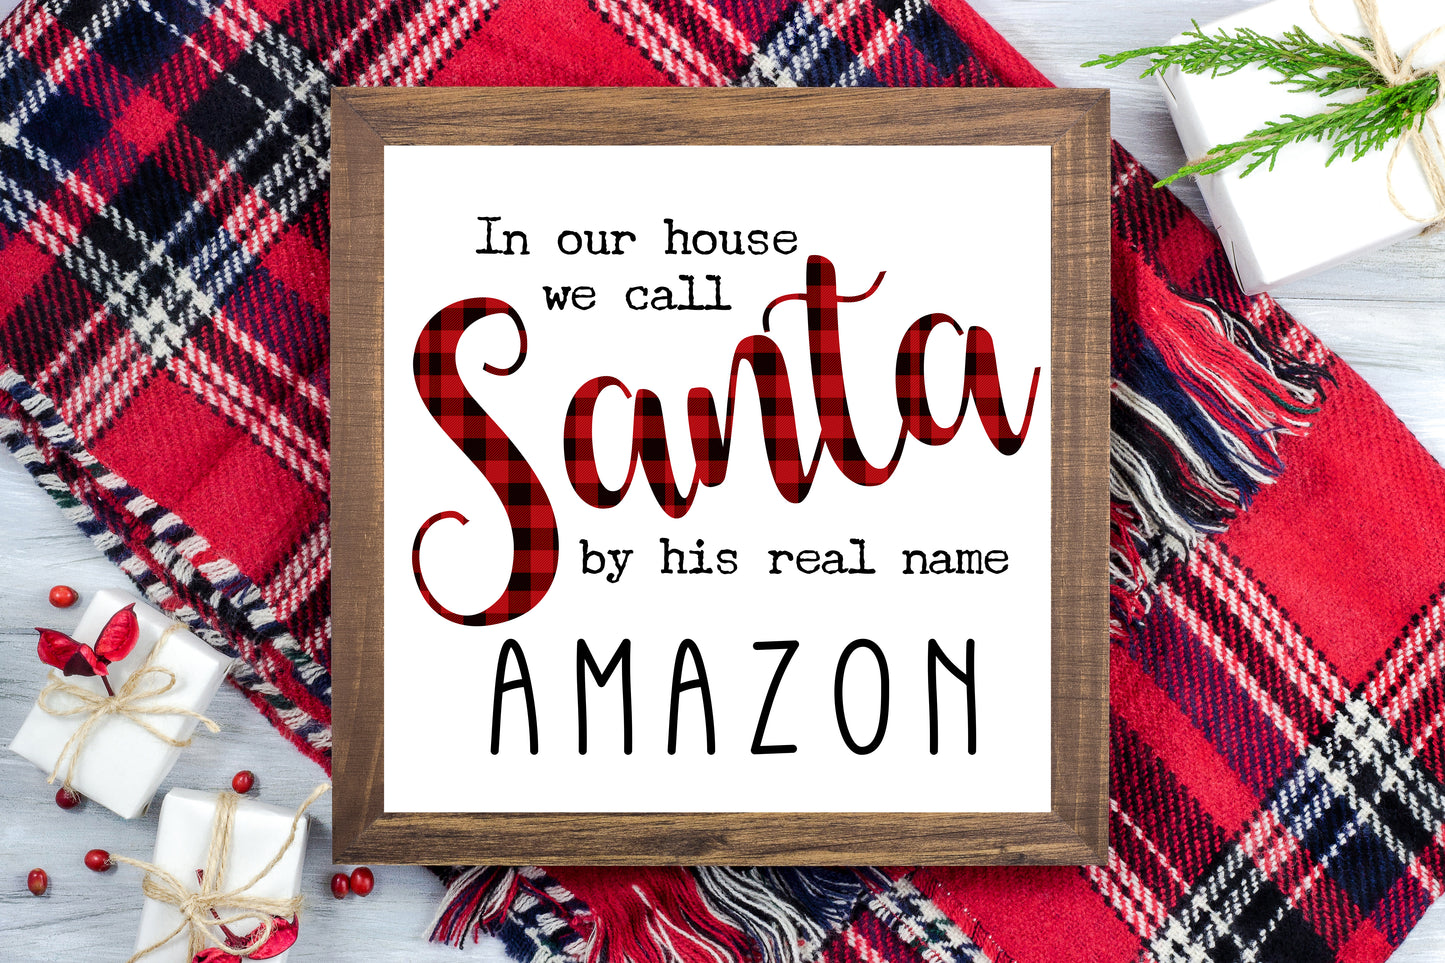 In this house we call Santa by his real name, Amazon - Funny Christmas Printable Sign Farmhouse Style  - Digital File